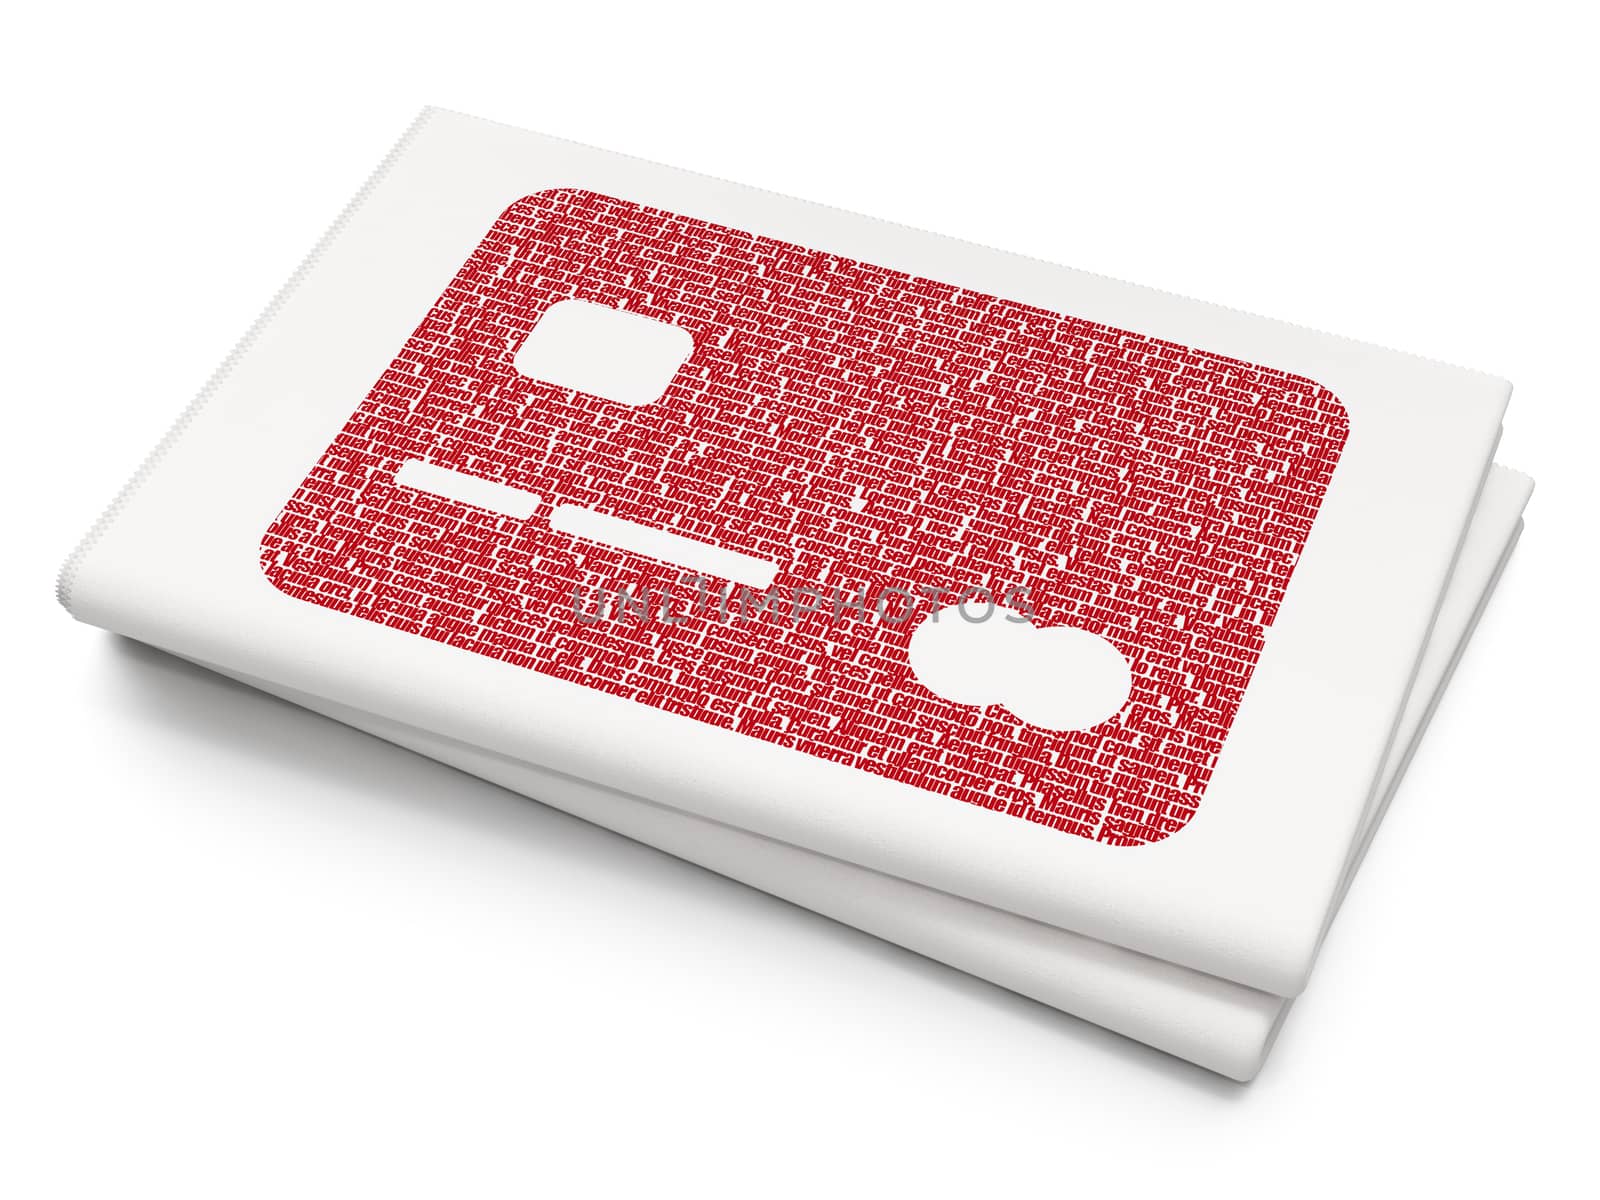 Currency concept: Pixelated red Credit Card icon on Blank Newspaper background, 3D rendering